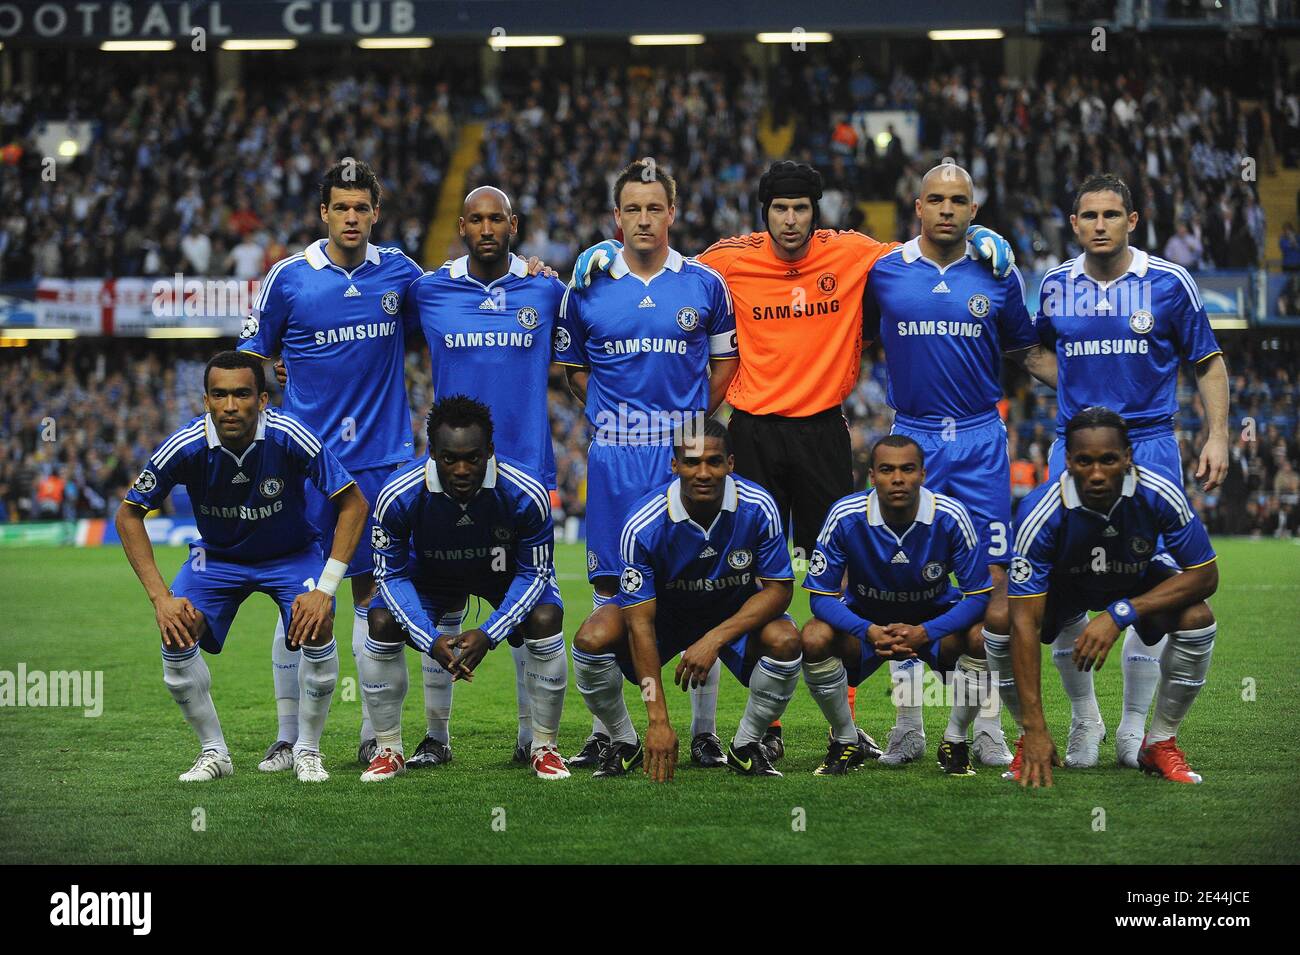 Chelsea soccer team group during the UEFA Champions League soccer match,  Semi Final, Second Leg, Chelsea vs Barcelona at the Stamford Bridge stadium  in London, UK on May 6, 2009. The match